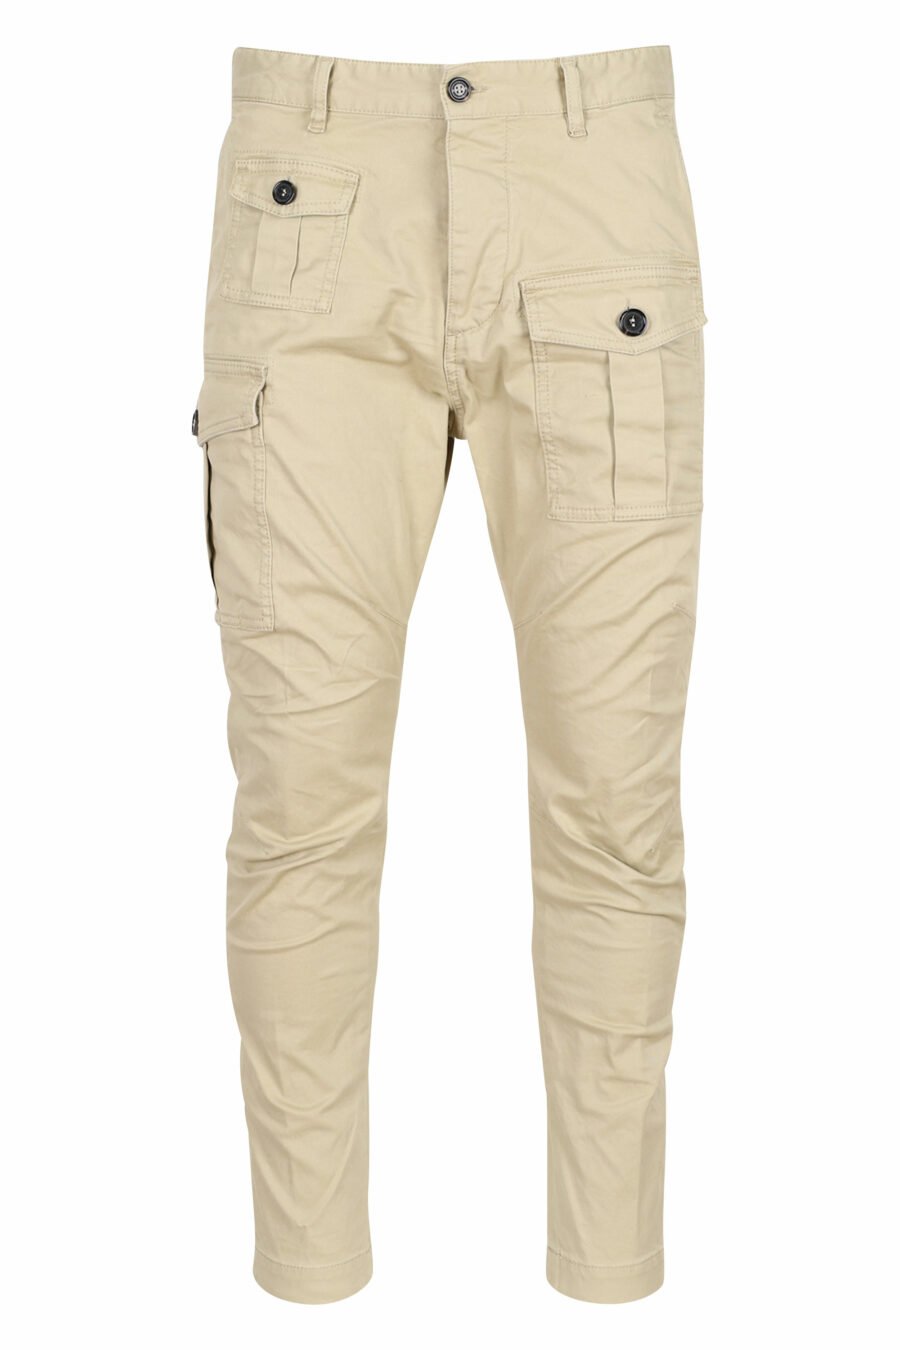 Dsquared2 - Beige sexy cargo pant with side pockets - BLS Fashion